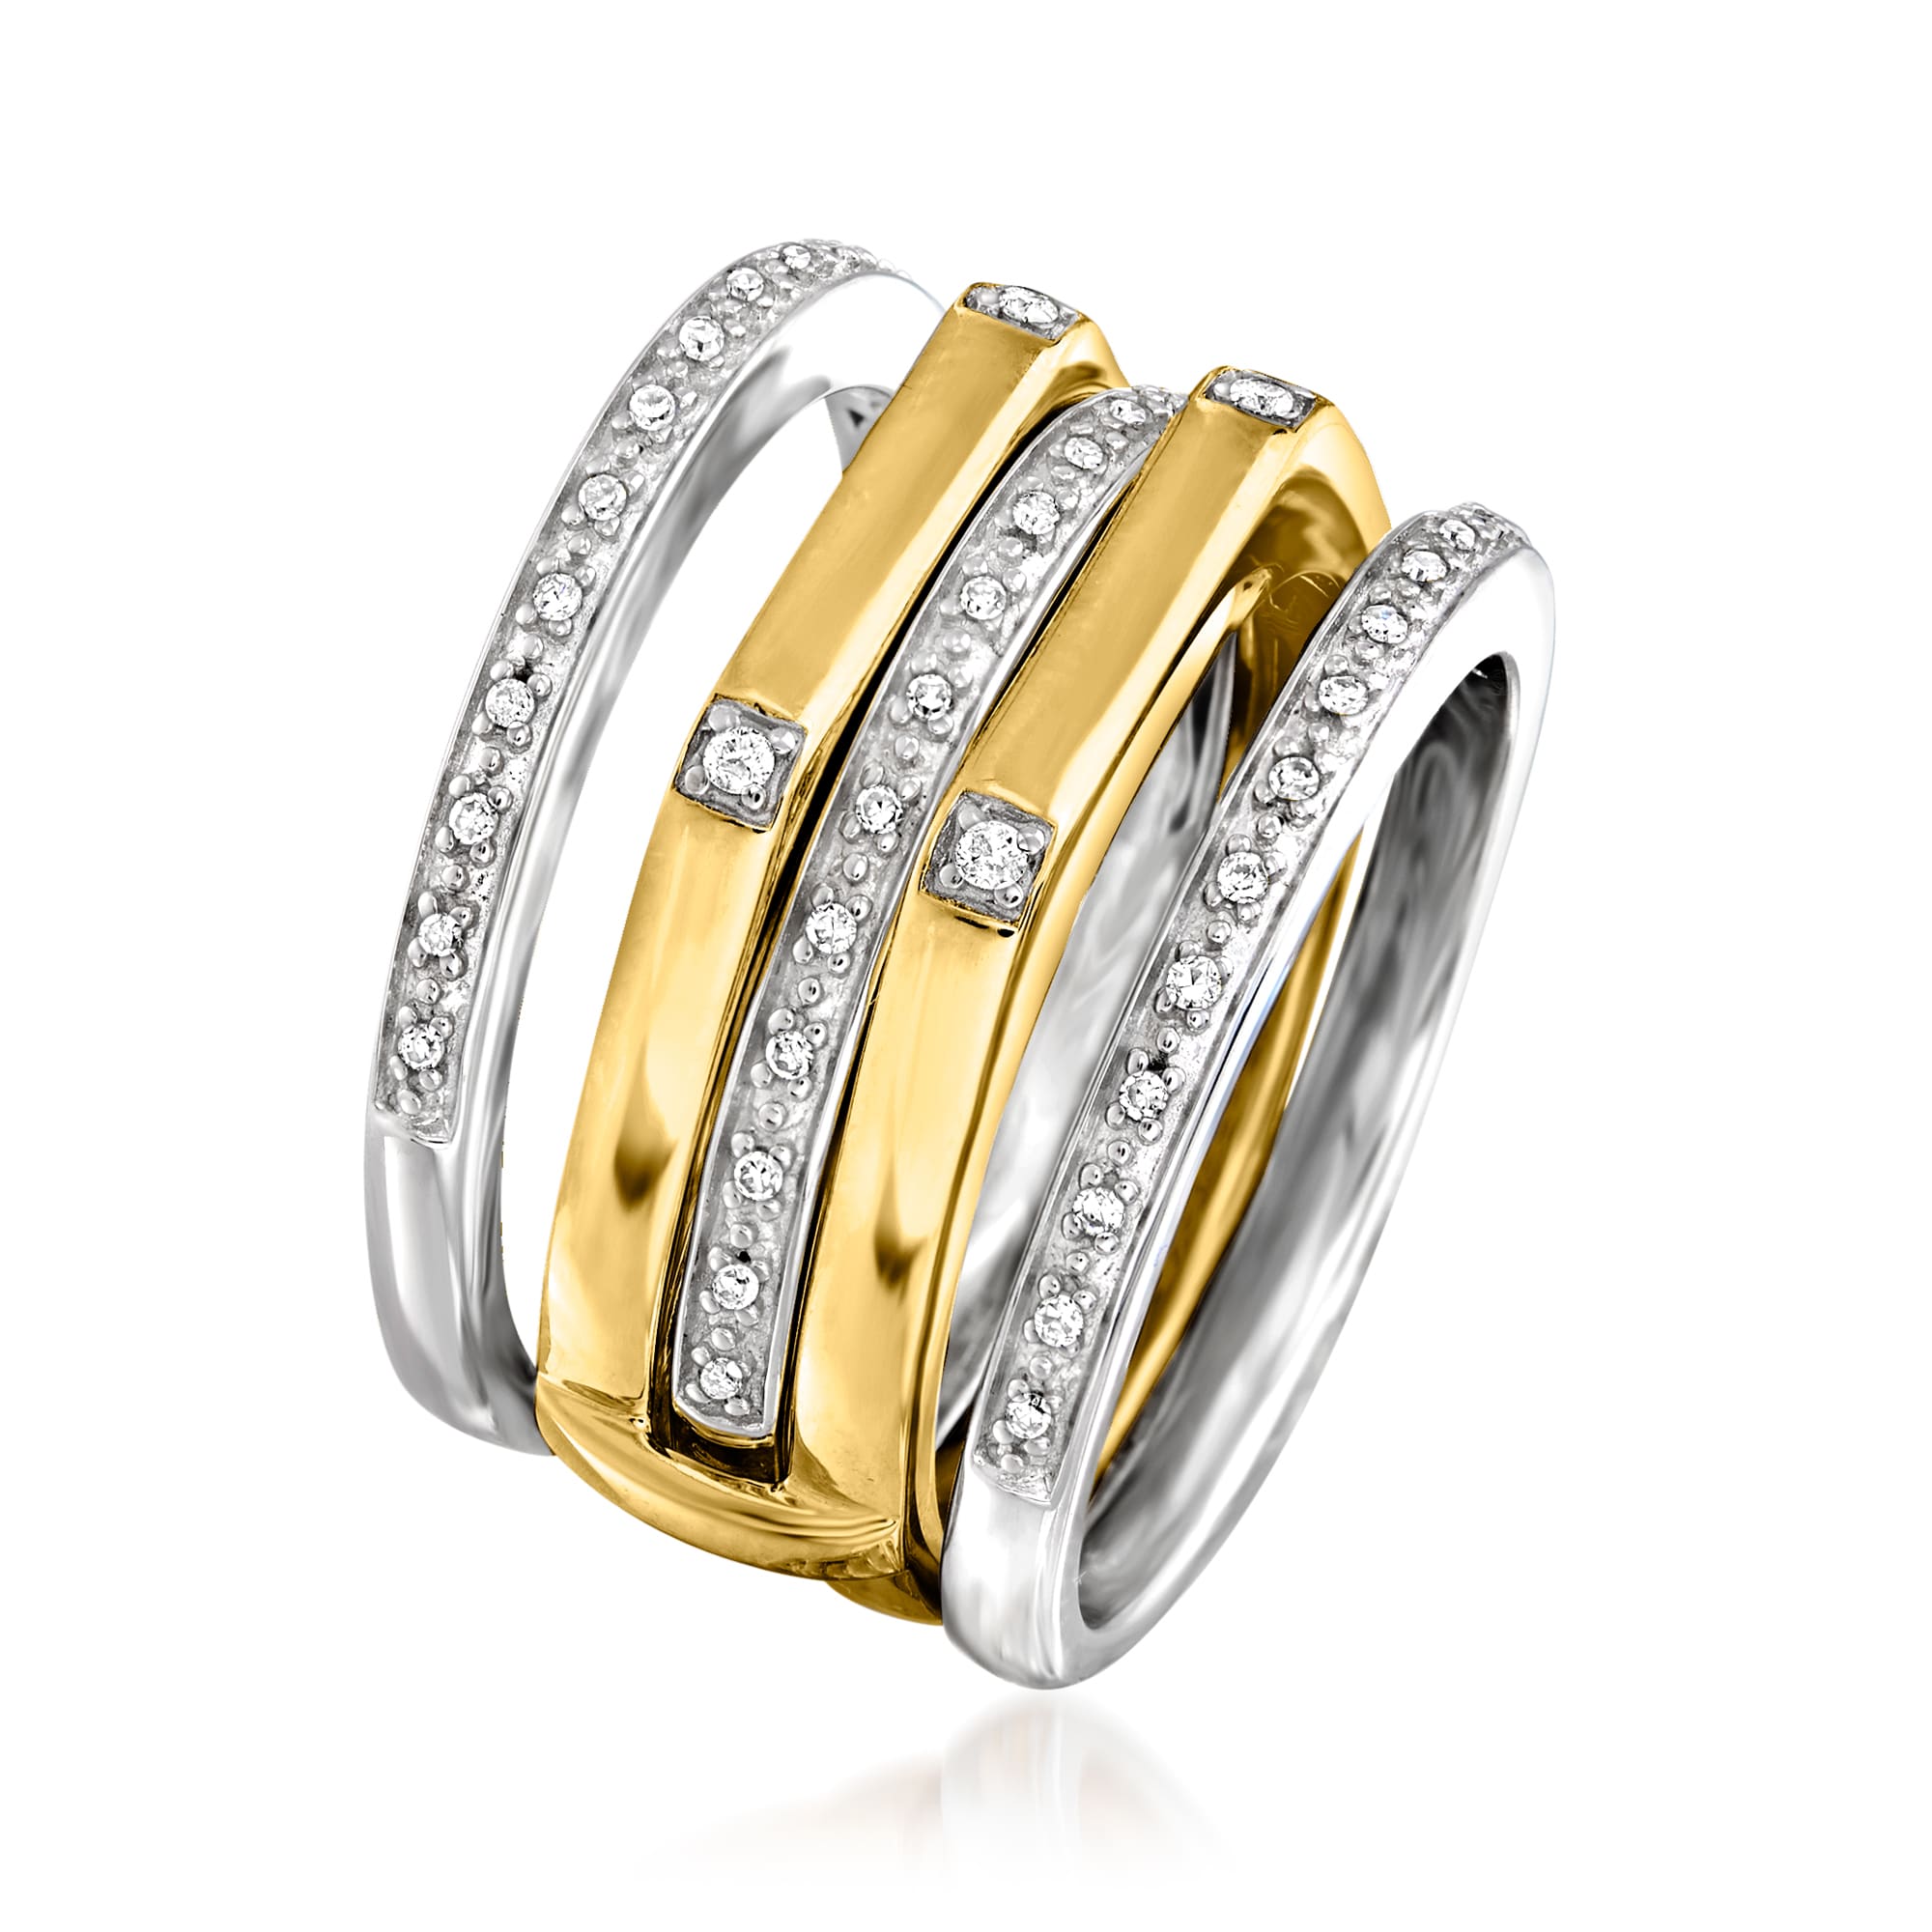 Ross-Simons Set Of Four .15 ct. t.w. Diamond Stackable Rings in